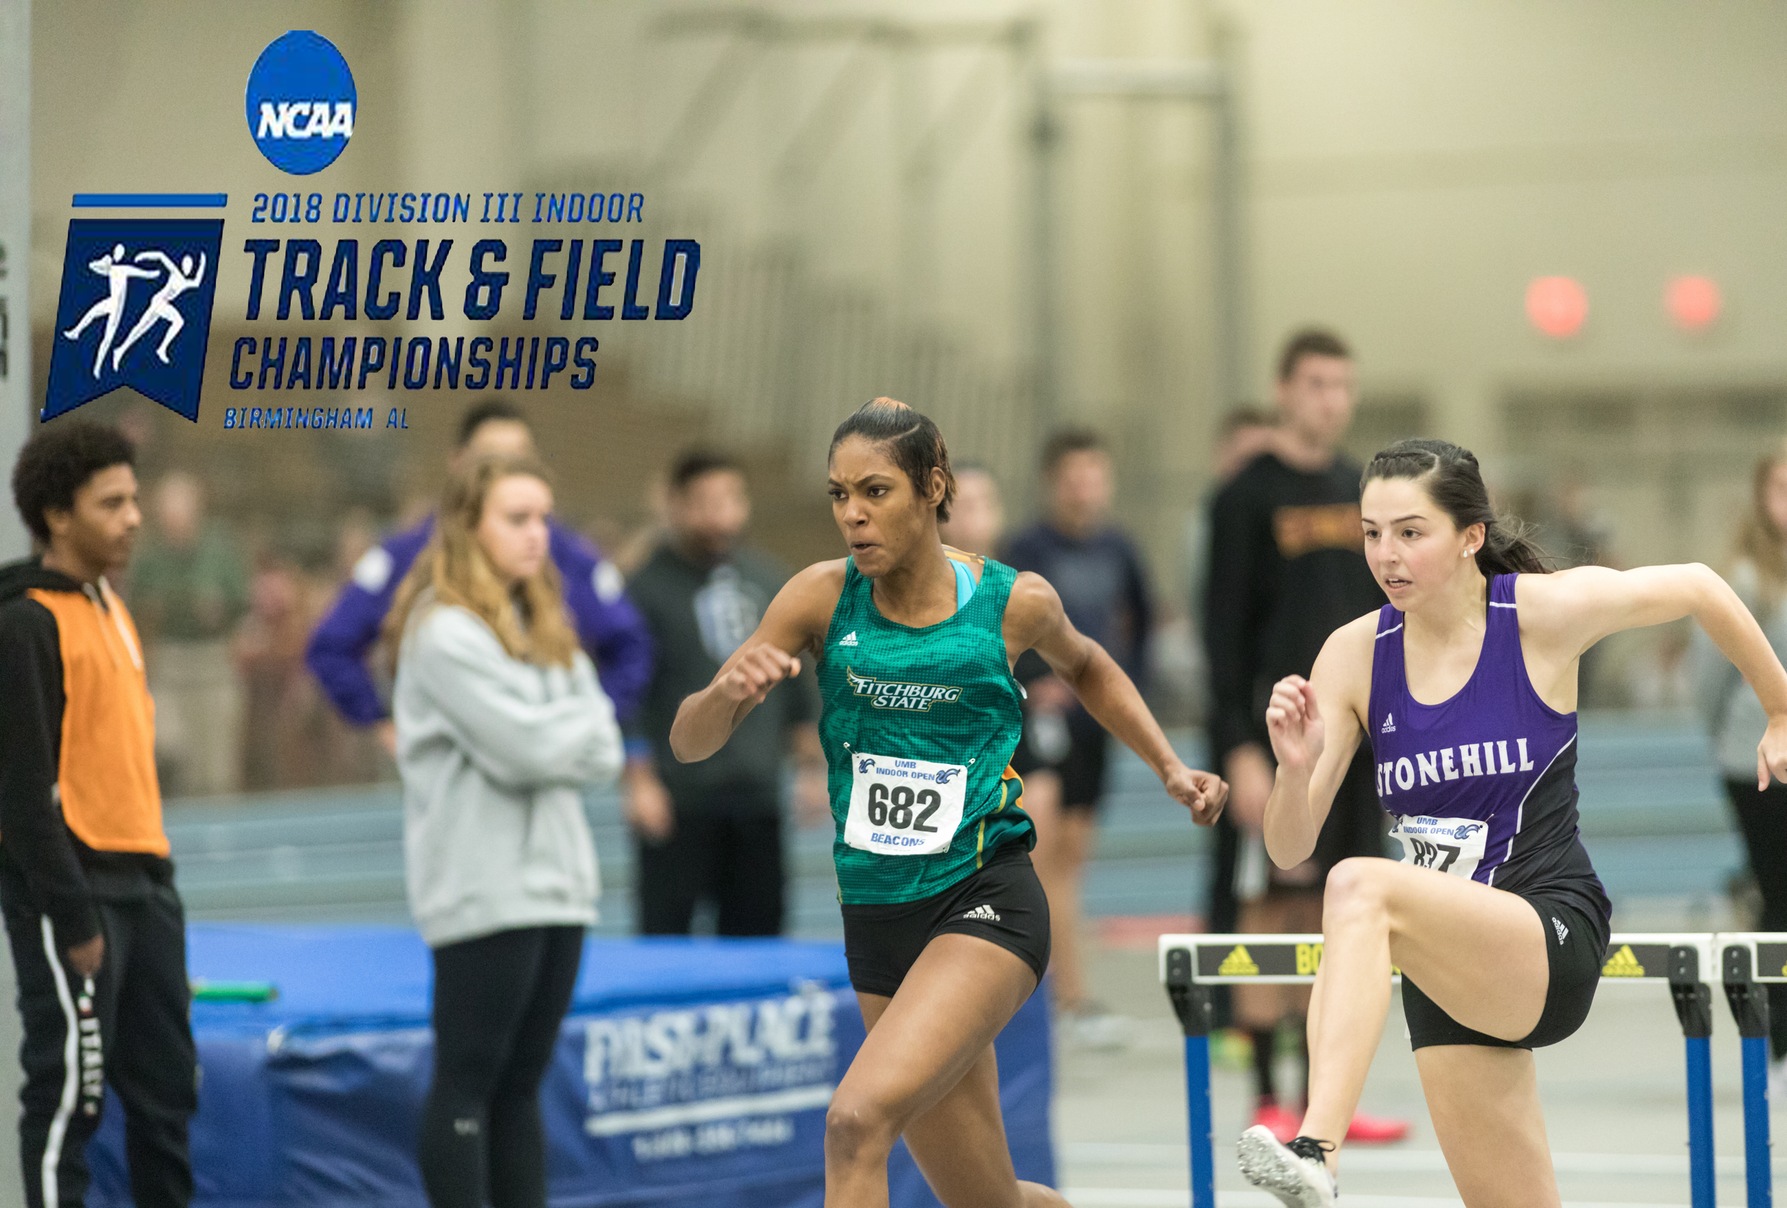 Woolley To Compete At 2018 NCAA Indoor Track & Field National Championships